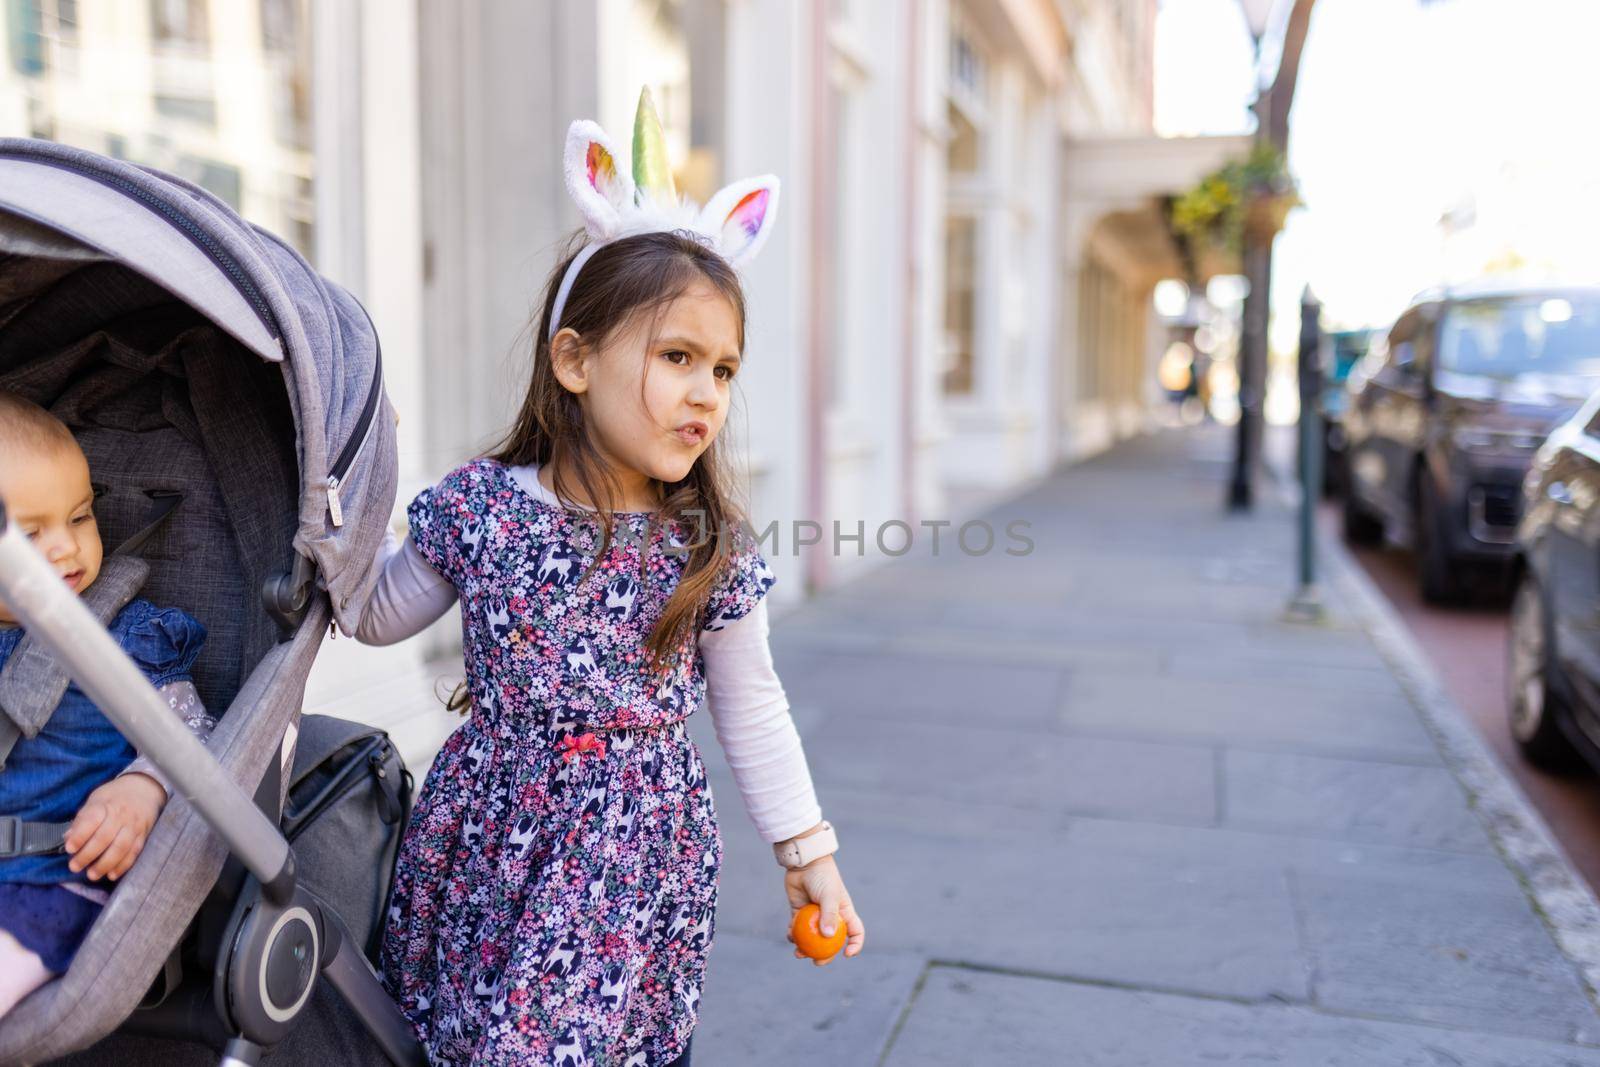 Adorable view of little girl wearing unicorn headband in the street next to her baby sister. Portrait of cute young child and gray stroller on the sidewalk. Lovely kids outdoors